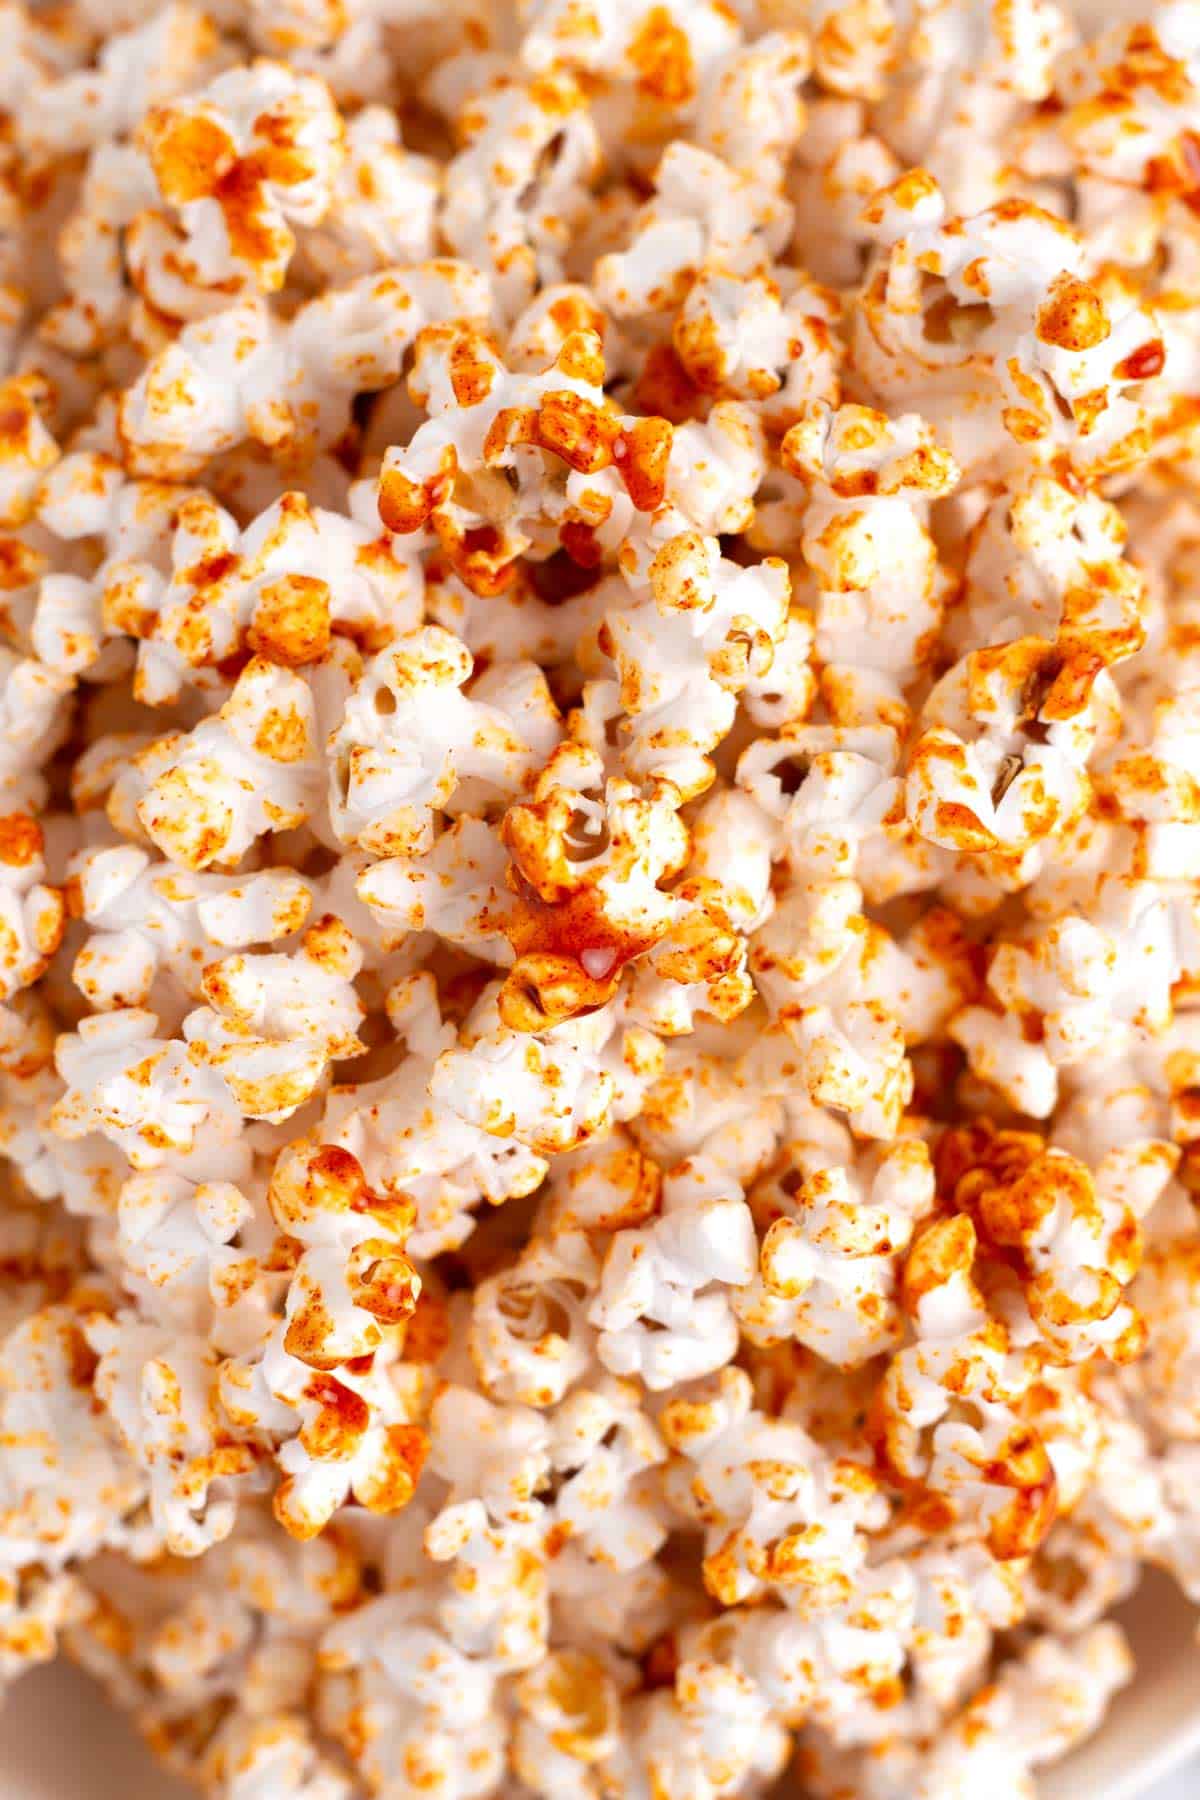 Spicy honey sauce caramelized on popcorn pieces.